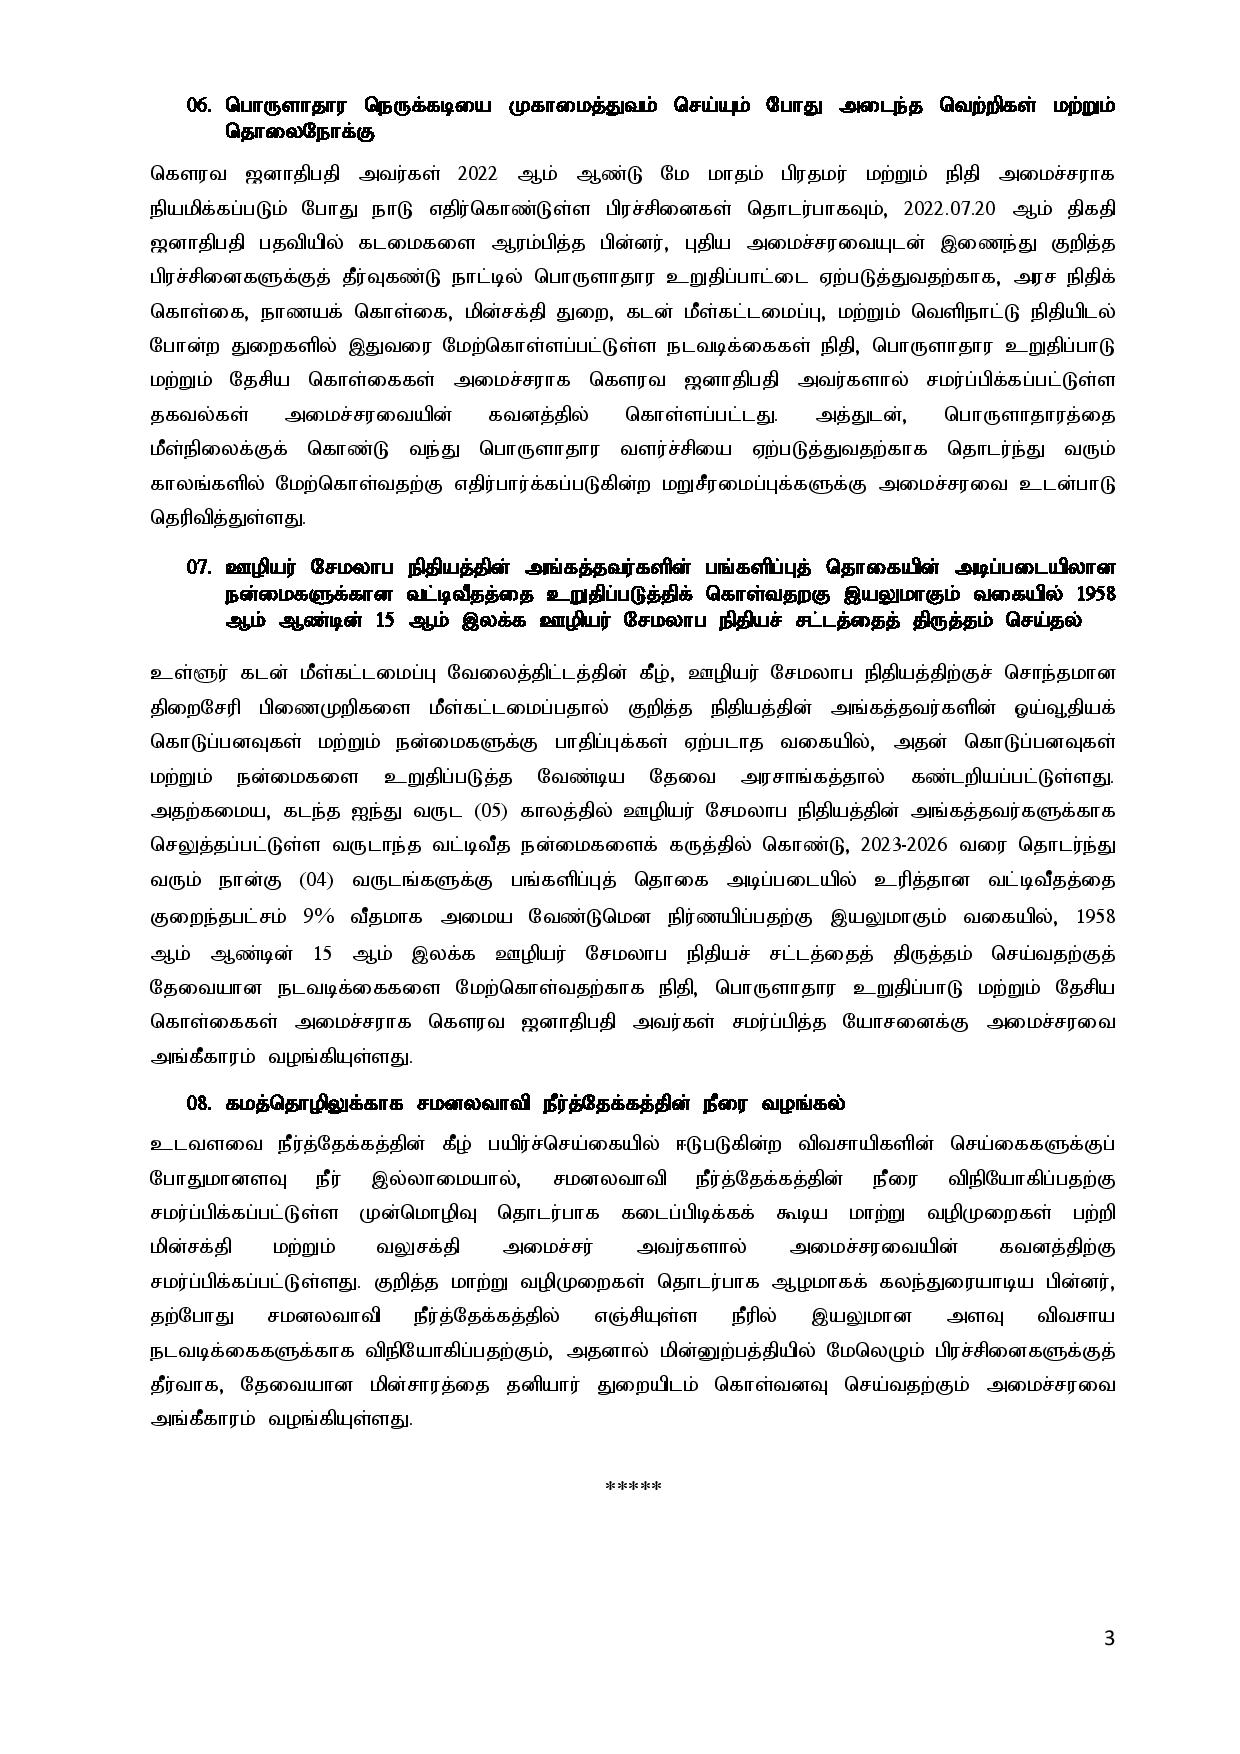 Cabinet Decisions on 07.08.2023 Tamil page 003